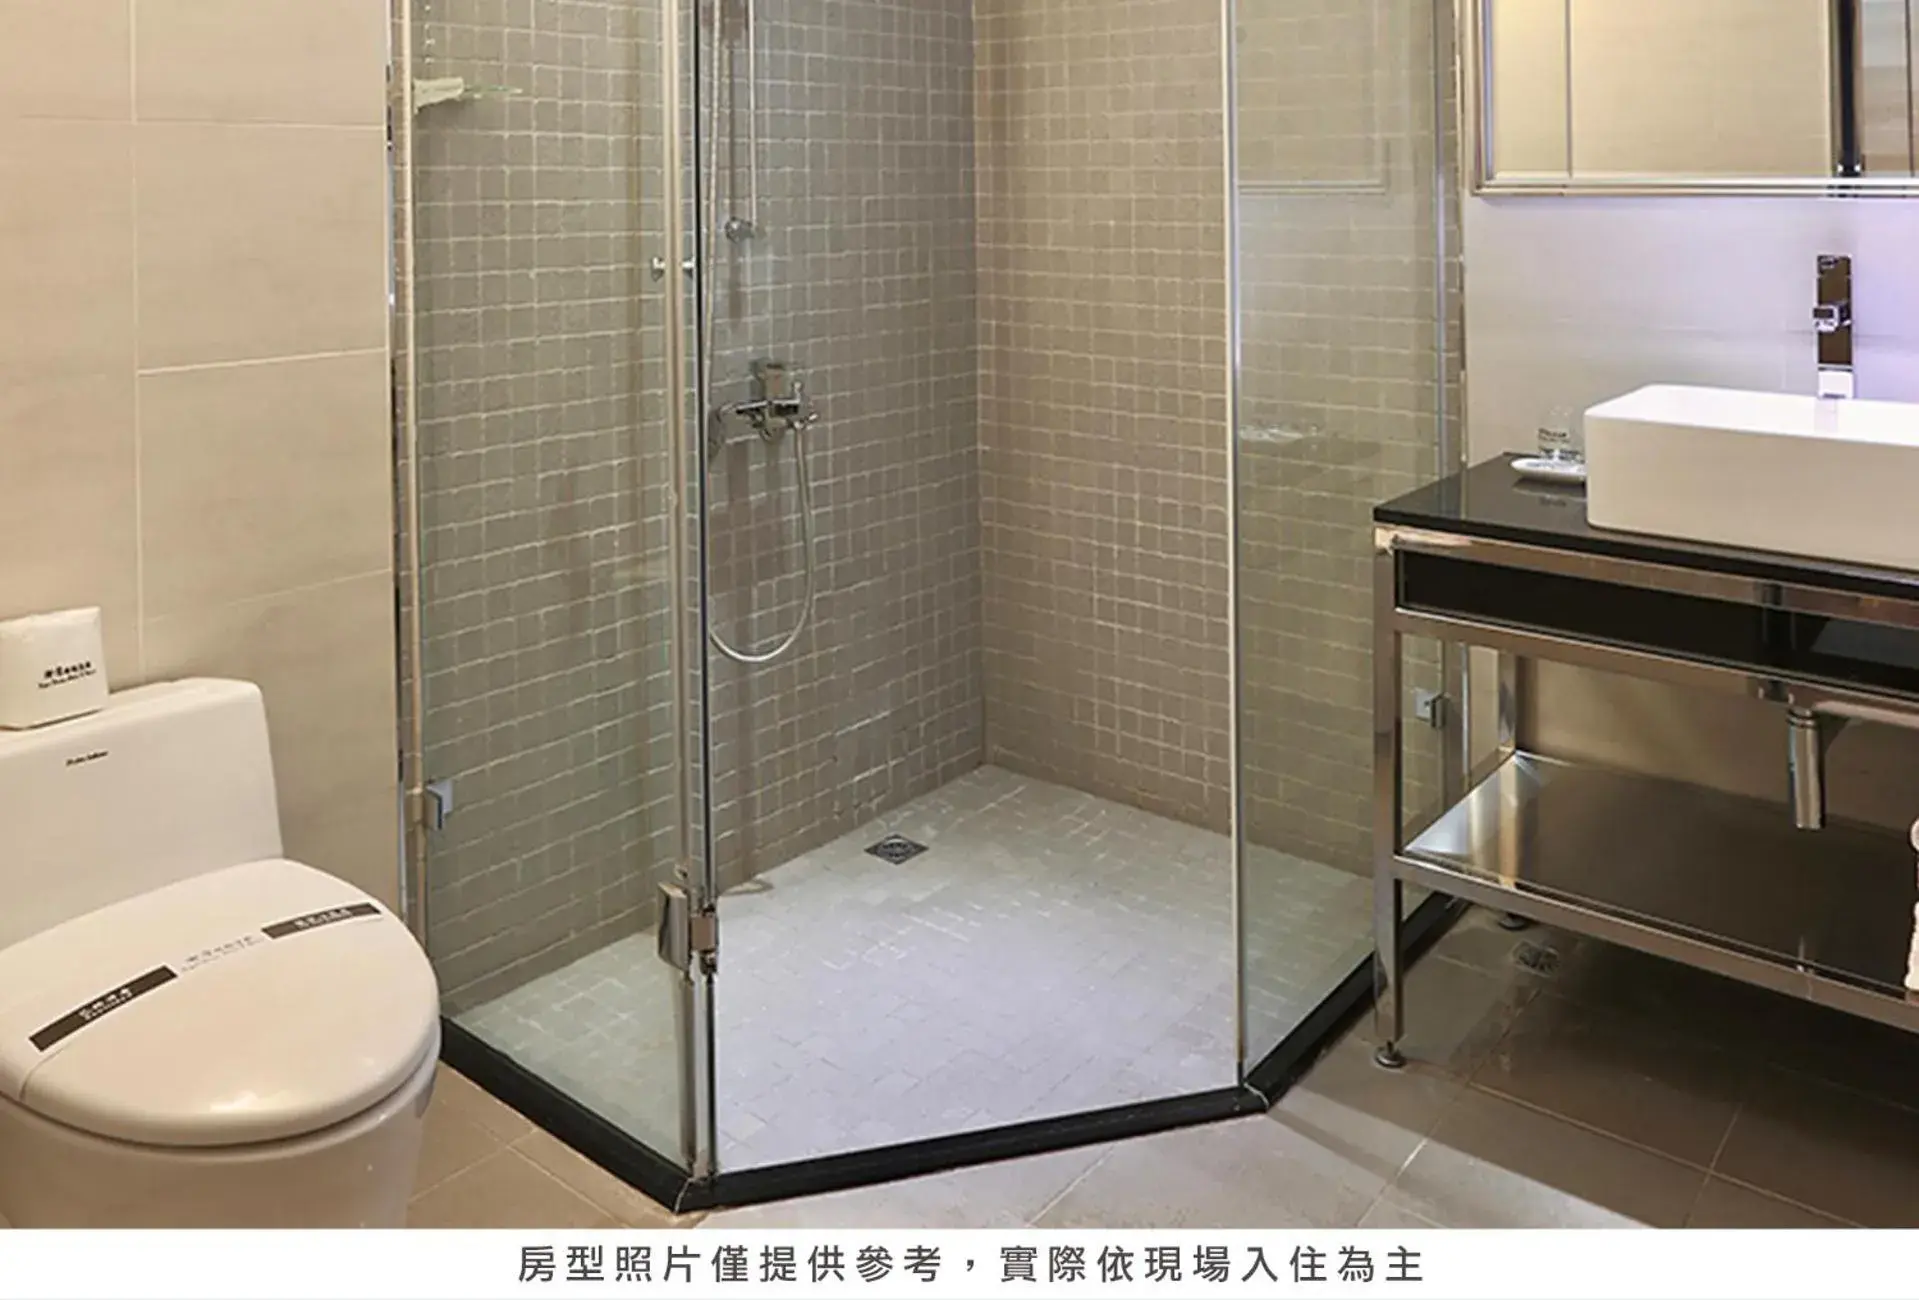 Bathroom in Royal Group Hotel Chang Chien Branch